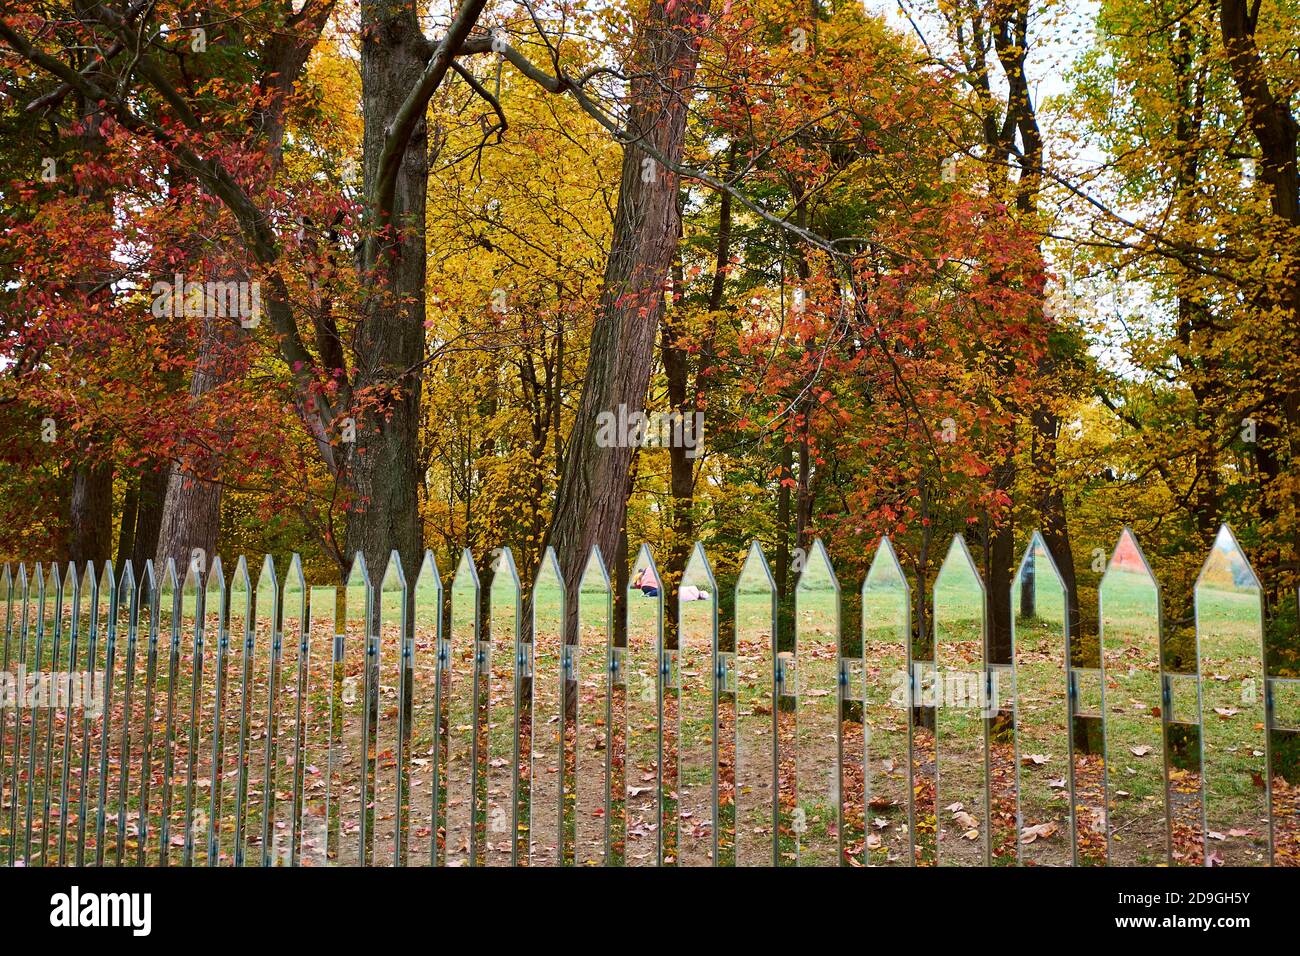 Alyson Shotz's Mirror Fence sculpture, a play on the traditional white picket fence style. During autumn, peak fall color at Storm King Art Center in Stock Photo